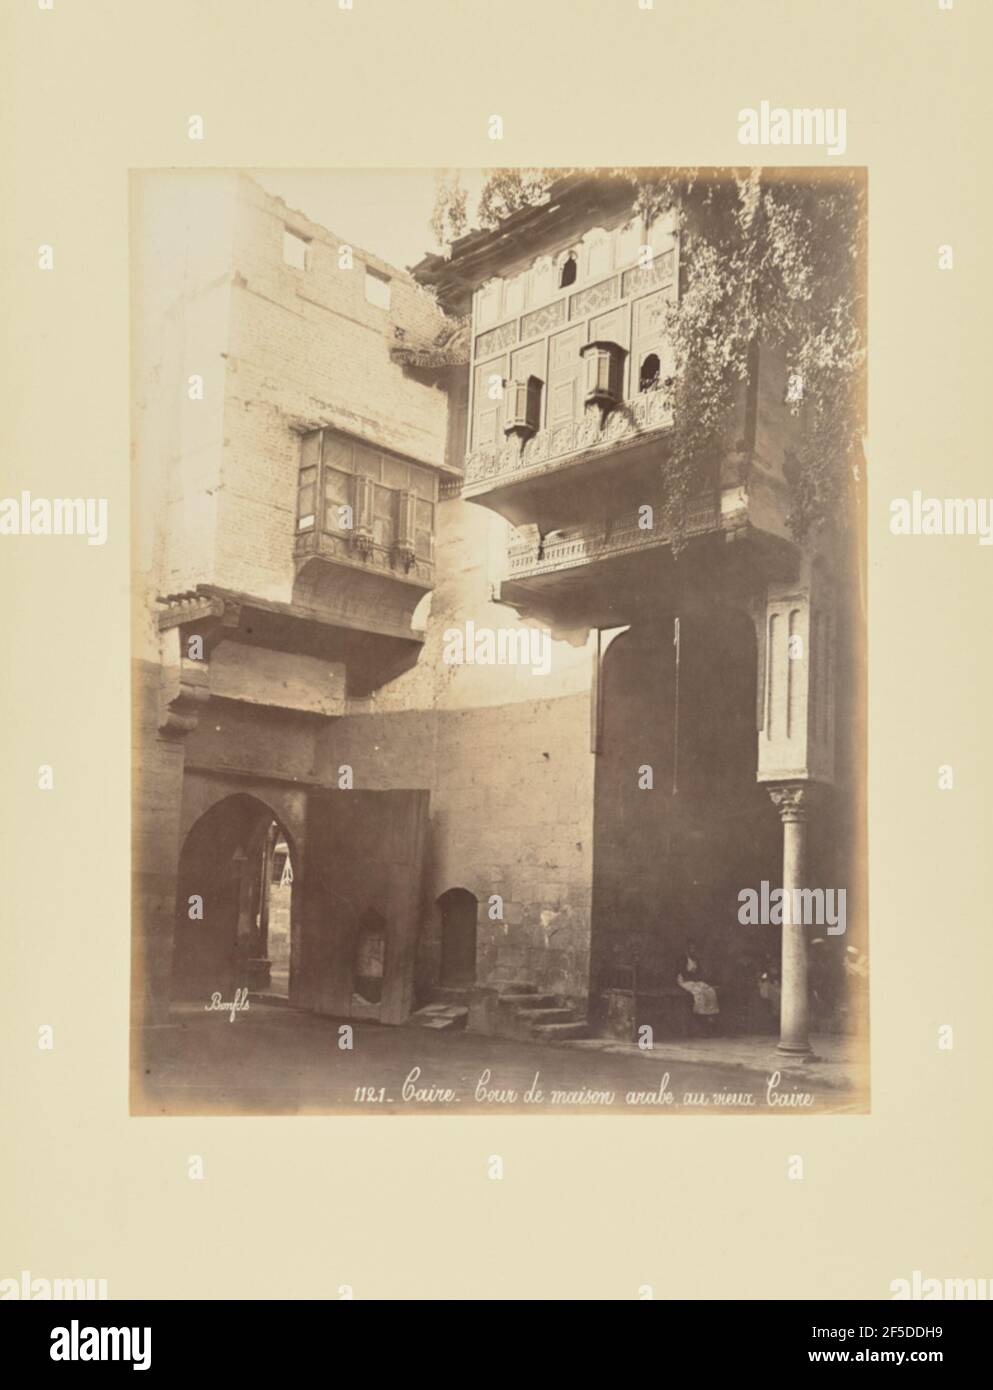 Caire - Cour de maison arabe, au vieux Caire. View of a courtyard surrounded by stone buildings with meshrebeeyehs, a type of oriel windows enclosed with carved wood latticework. A section of the building on the right area of the image appears to be supported by a single decorated pillar, under which a number of people are sitting.. (Recto, print) lower right, inscribed in the negative: '1121   Caire   Cour de maison arabe, au vieux Caire'; Stock Photo